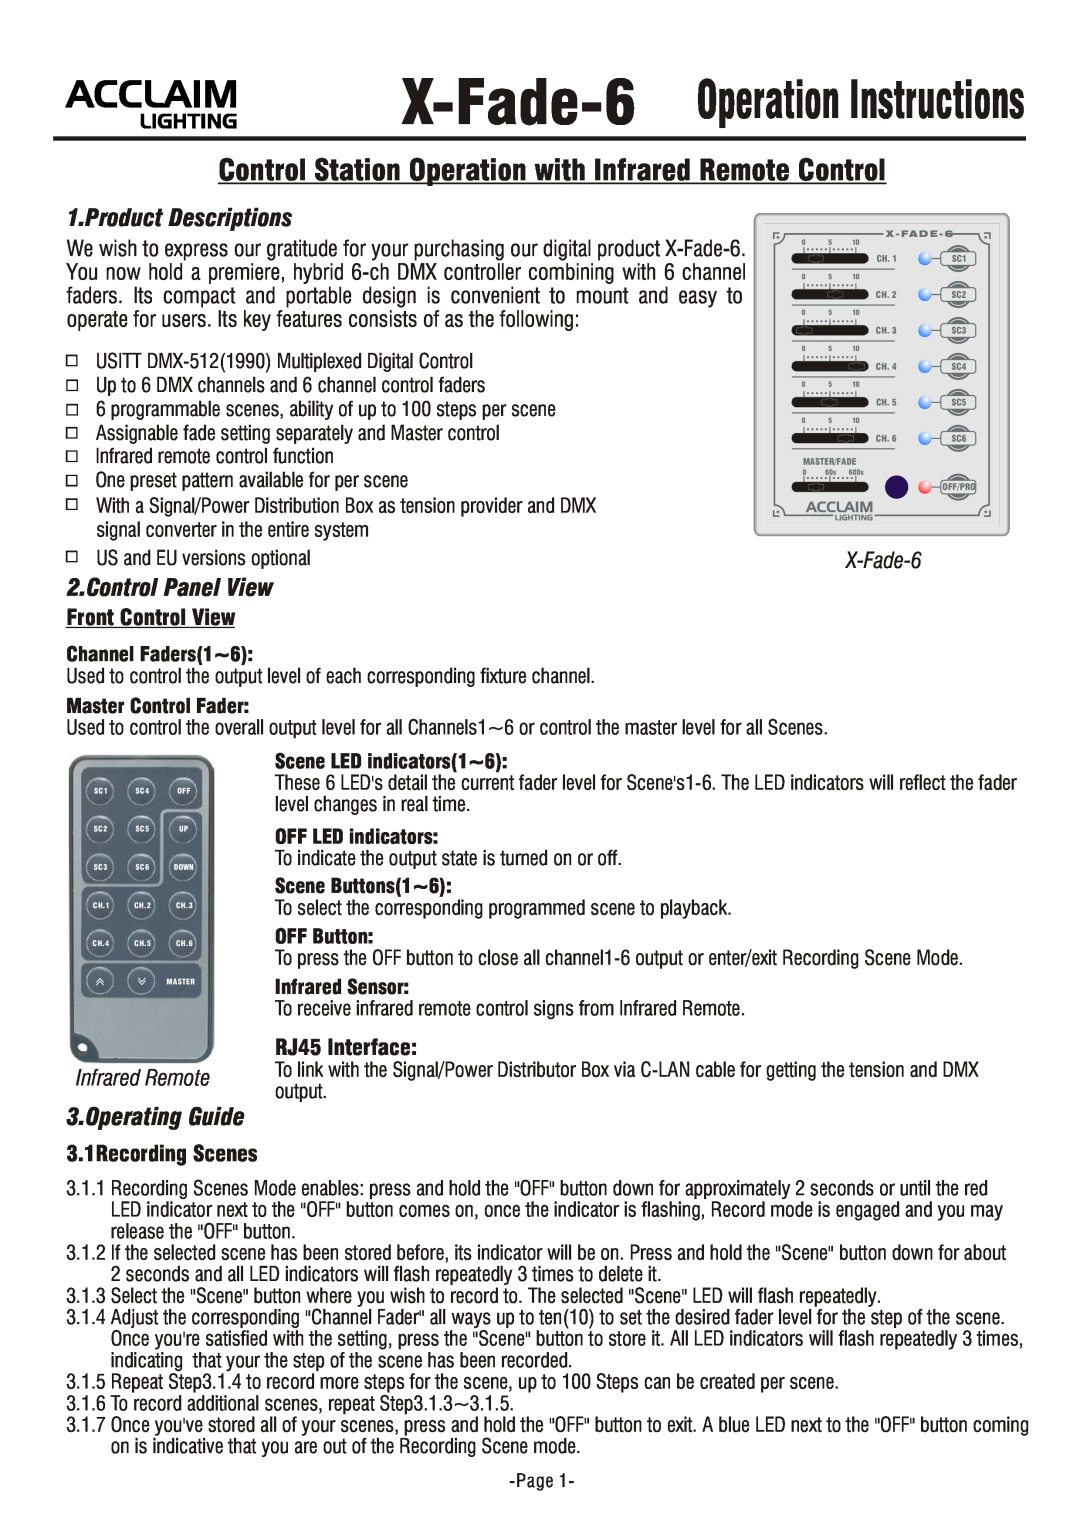 Acclaim Lighting X-FADE-6 manual Product Descriptions, Control Panel View, Operating Guide, Front Control View, X-Fade-6 